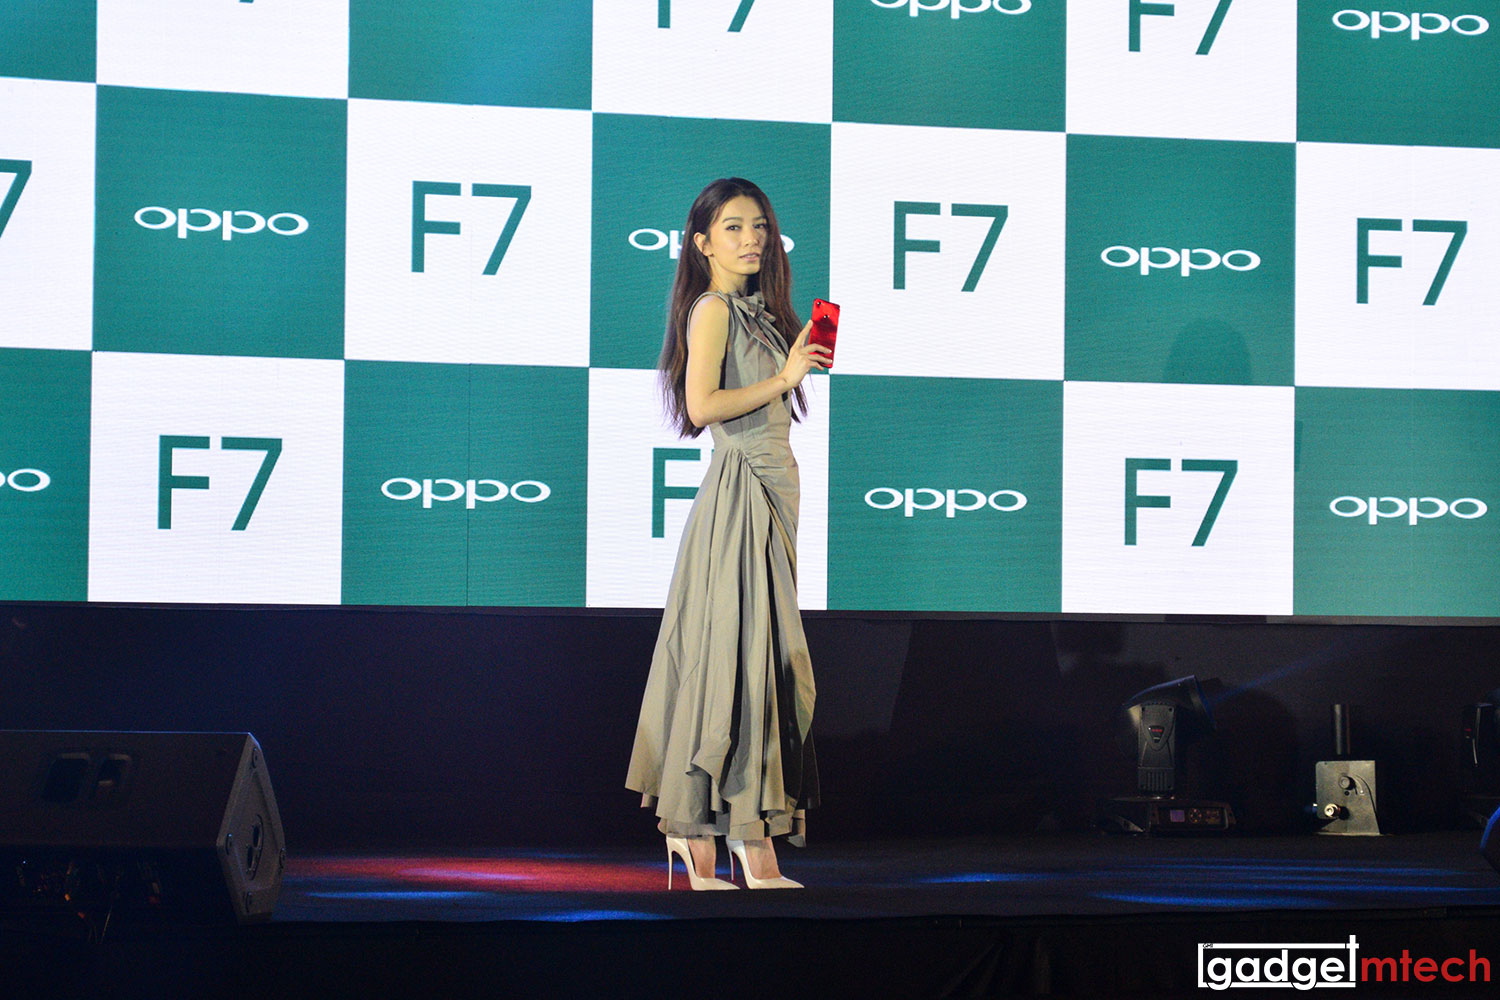 OPPO F7 Officially Launched in Malaysia